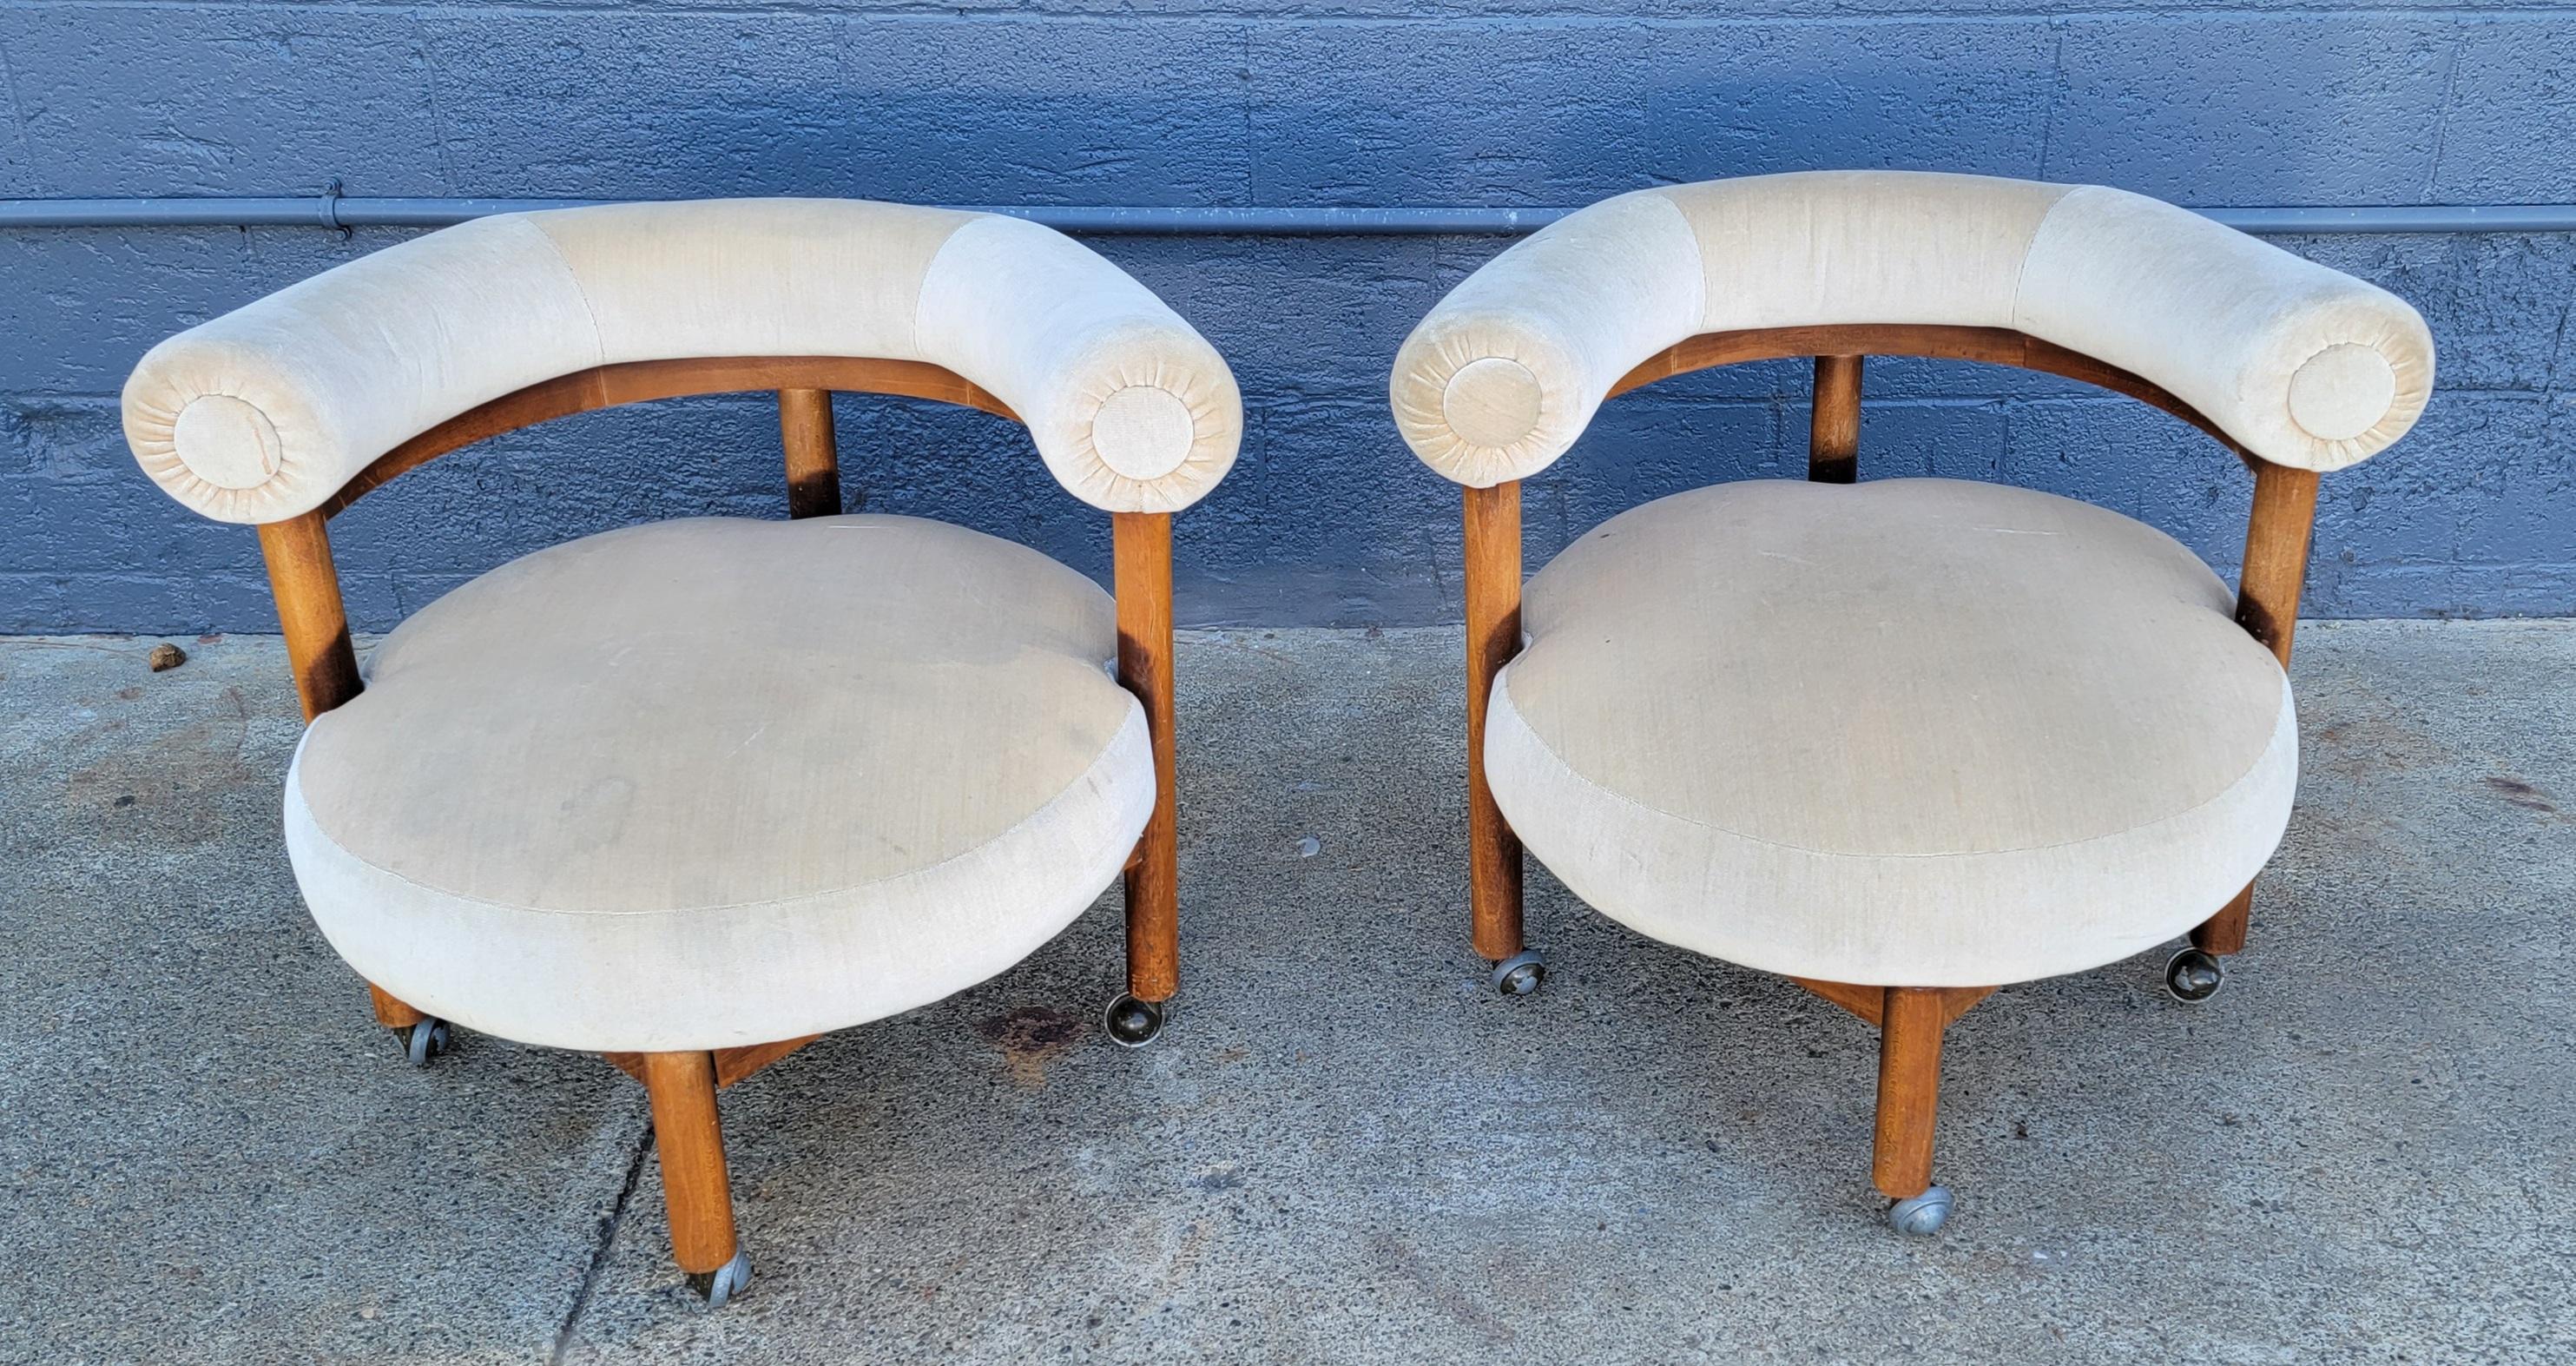 An unusual and impressive pair of round lounge chairs with a semi-circular backrest. Circa. 1960's. Designed in the manner of Adrian Pearsall, Sven Ellekaer or the Nanna Ditzel 